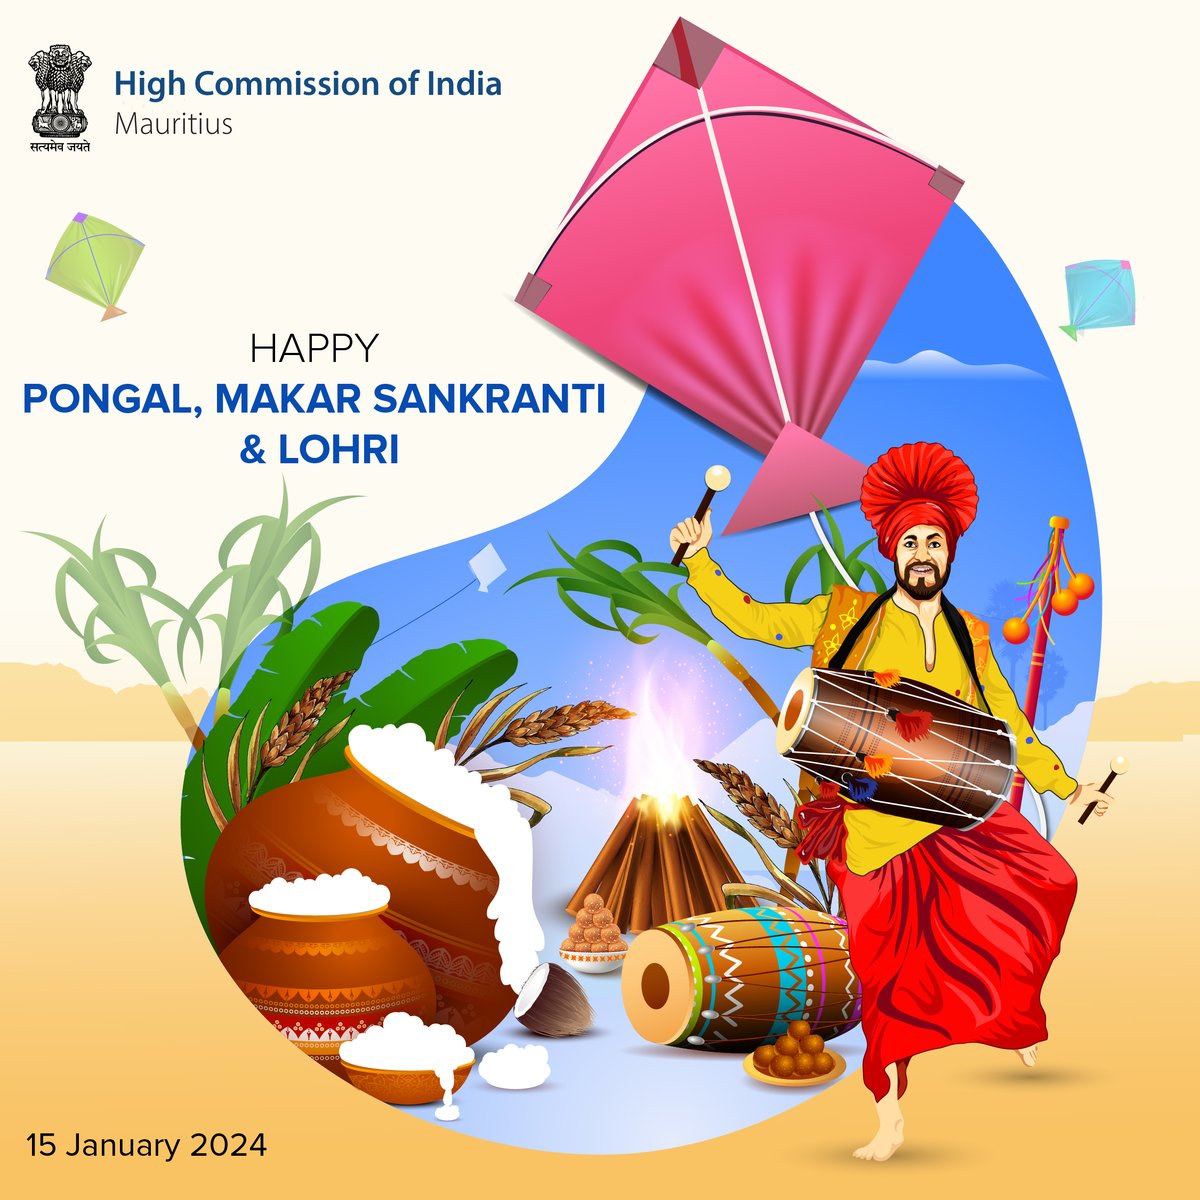 May the harvest abundance of Pongal, the vibrant spirit of Makar Sankranti and the warmth of Lohri fill your days with joy and prosperity. Wishing you a season of harvest delights and festive cheer! #MakarSankranti #Pongal #Lohri #IndiaMauritus @MEAIndia @IndianDiplomacy